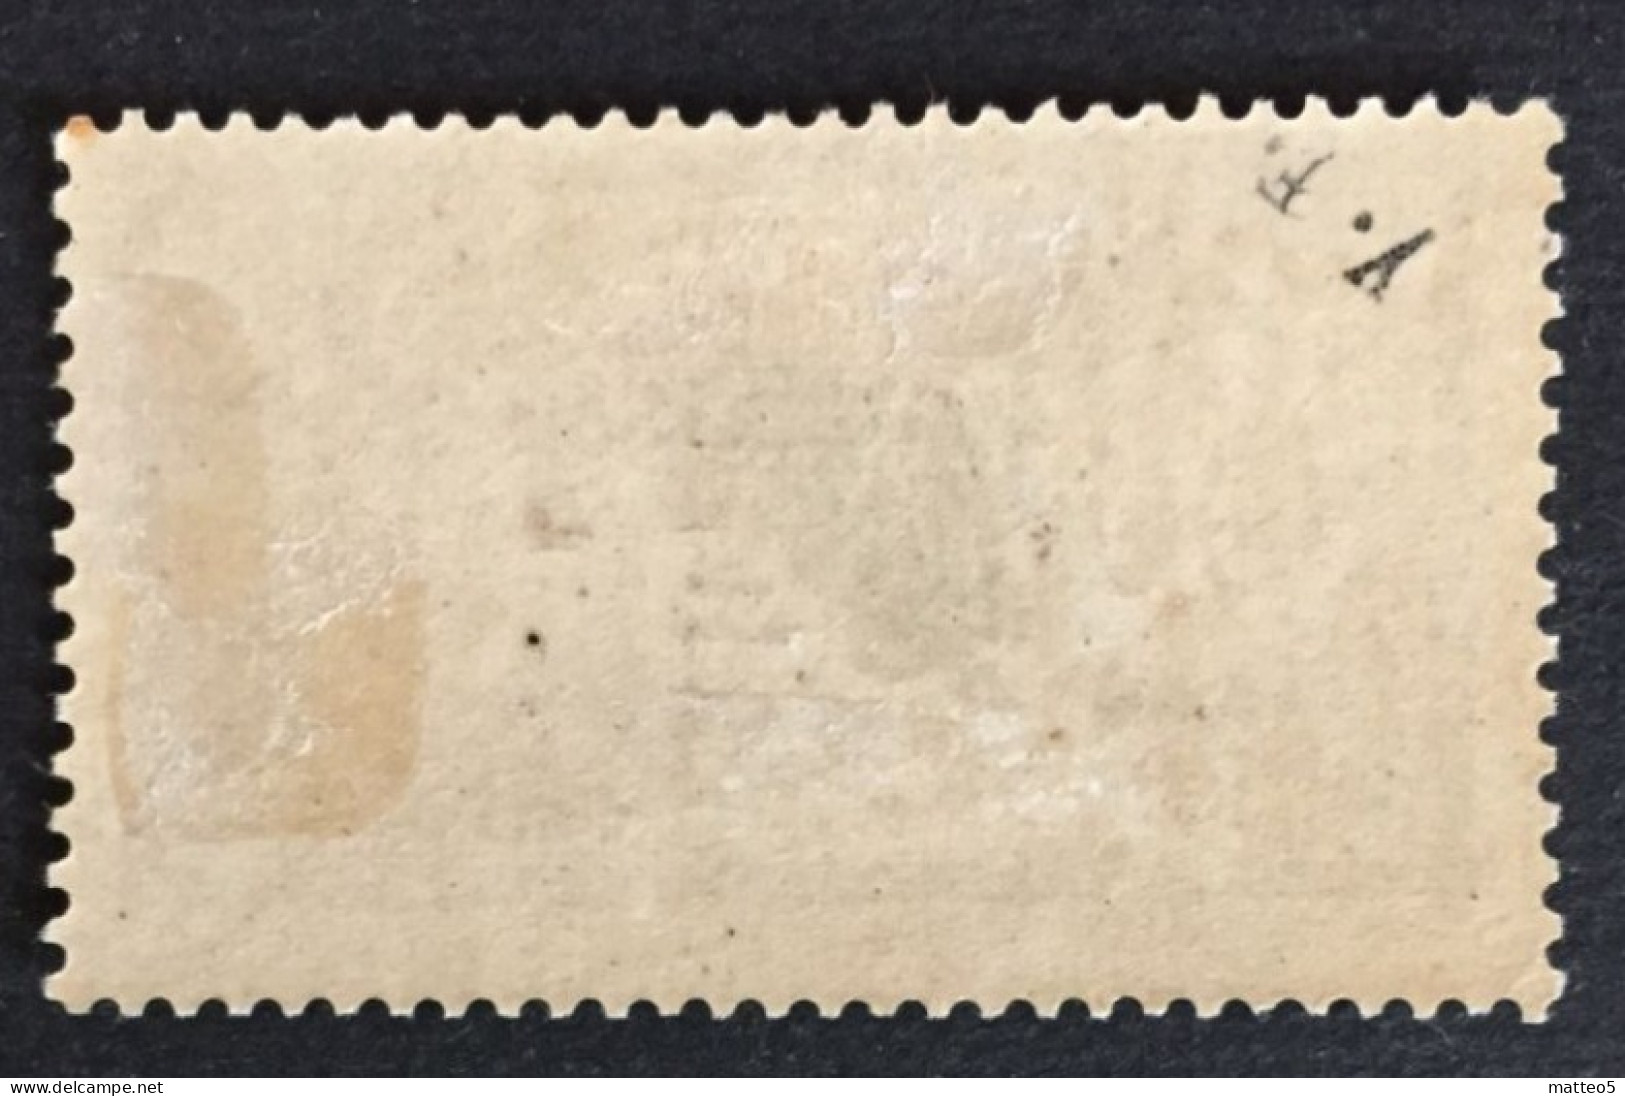 1907 - China French Post Office - Type Merson - Definitives Surcharged New Valve  - Unused - Neufs